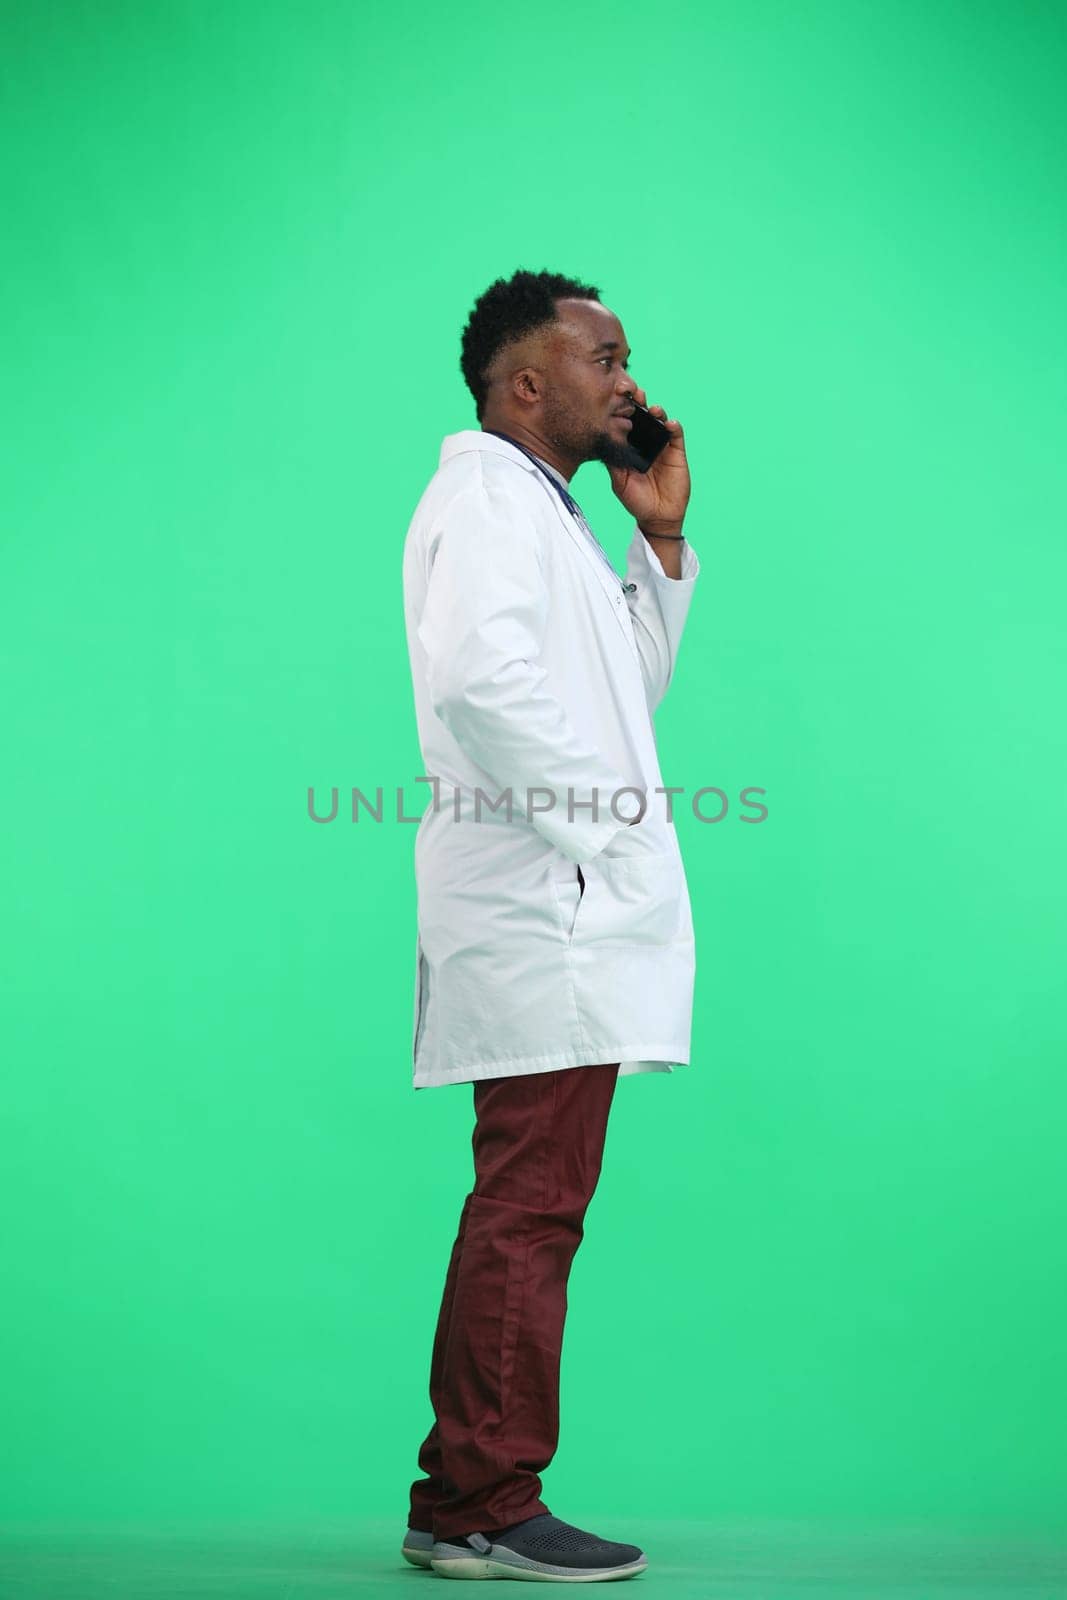 The doctor, in full height, on a green background, talking on the phone.